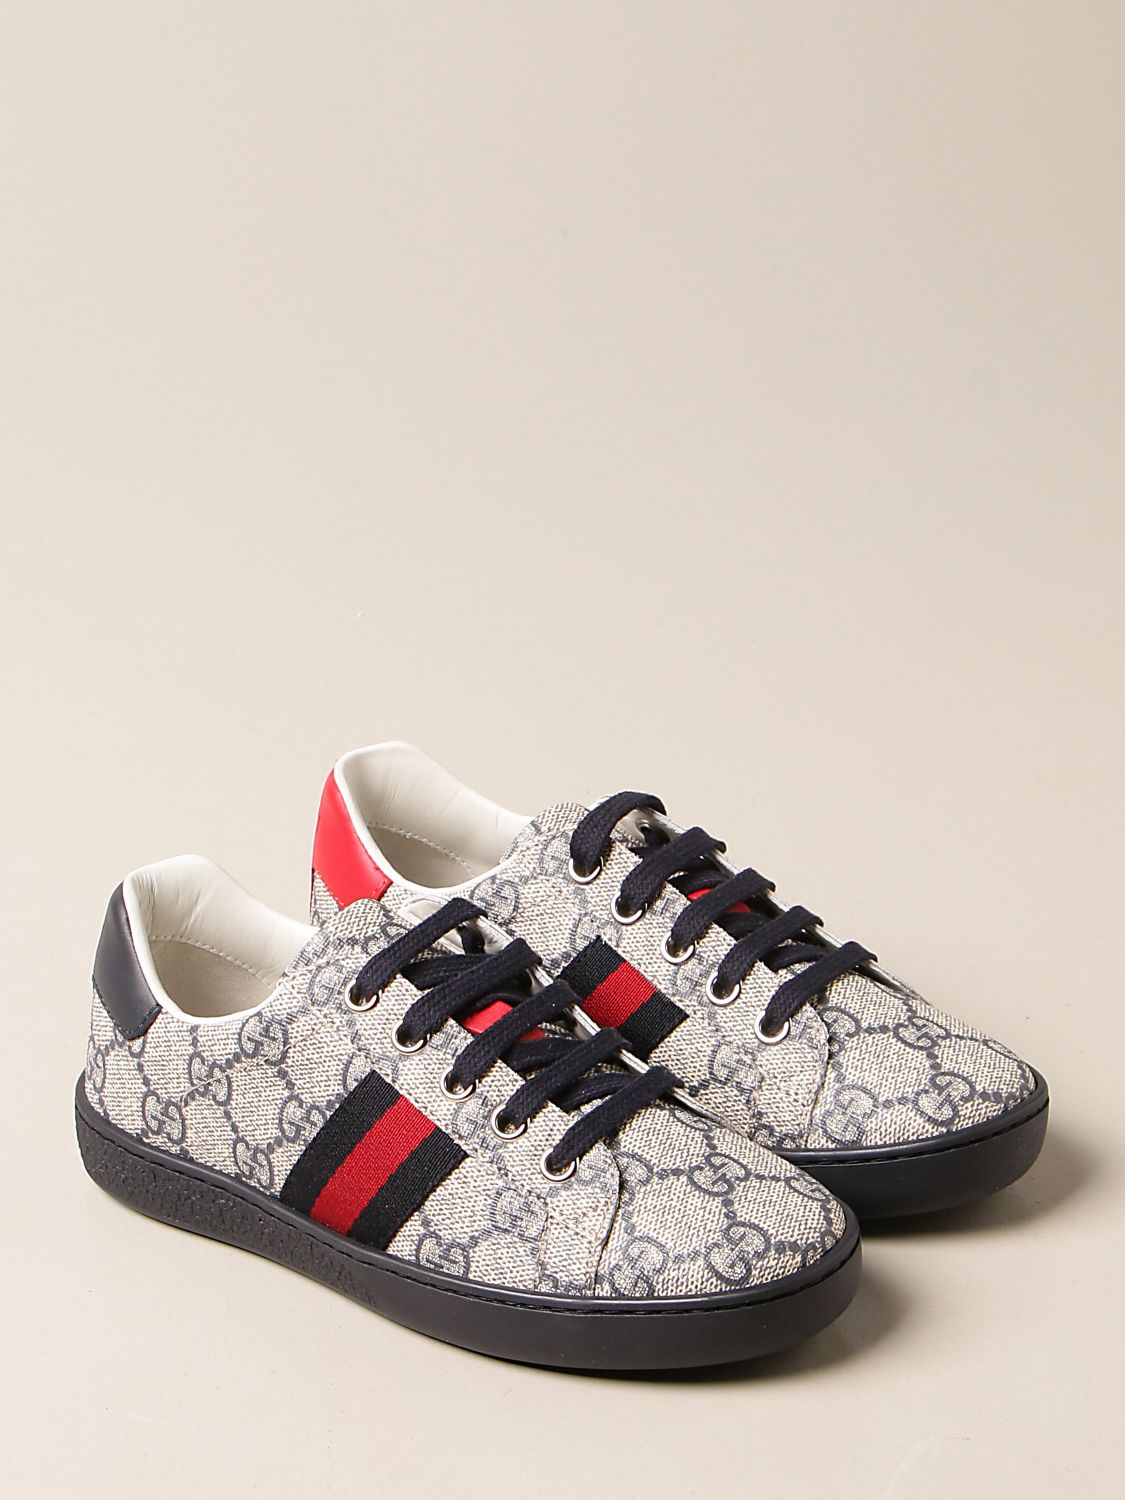 GUCCI: Ace sneakers in GG Supreme fabric with Web bands - Beige | Gucci ...